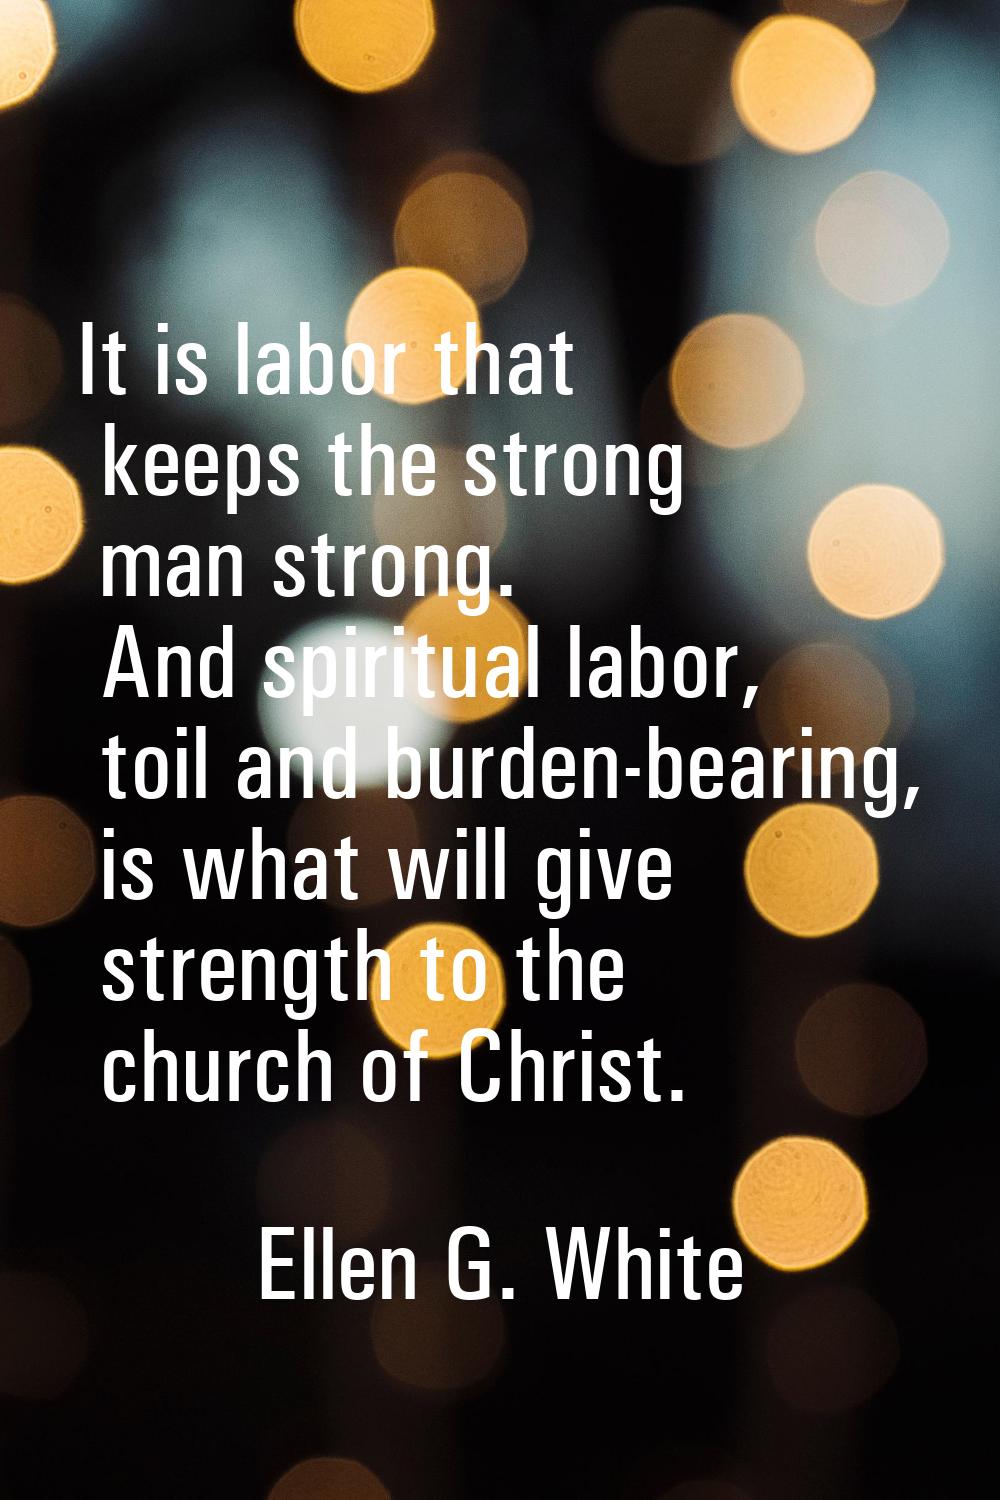 It is labor that keeps the strong man strong. And spiritual labor, toil and burden-bearing, is what